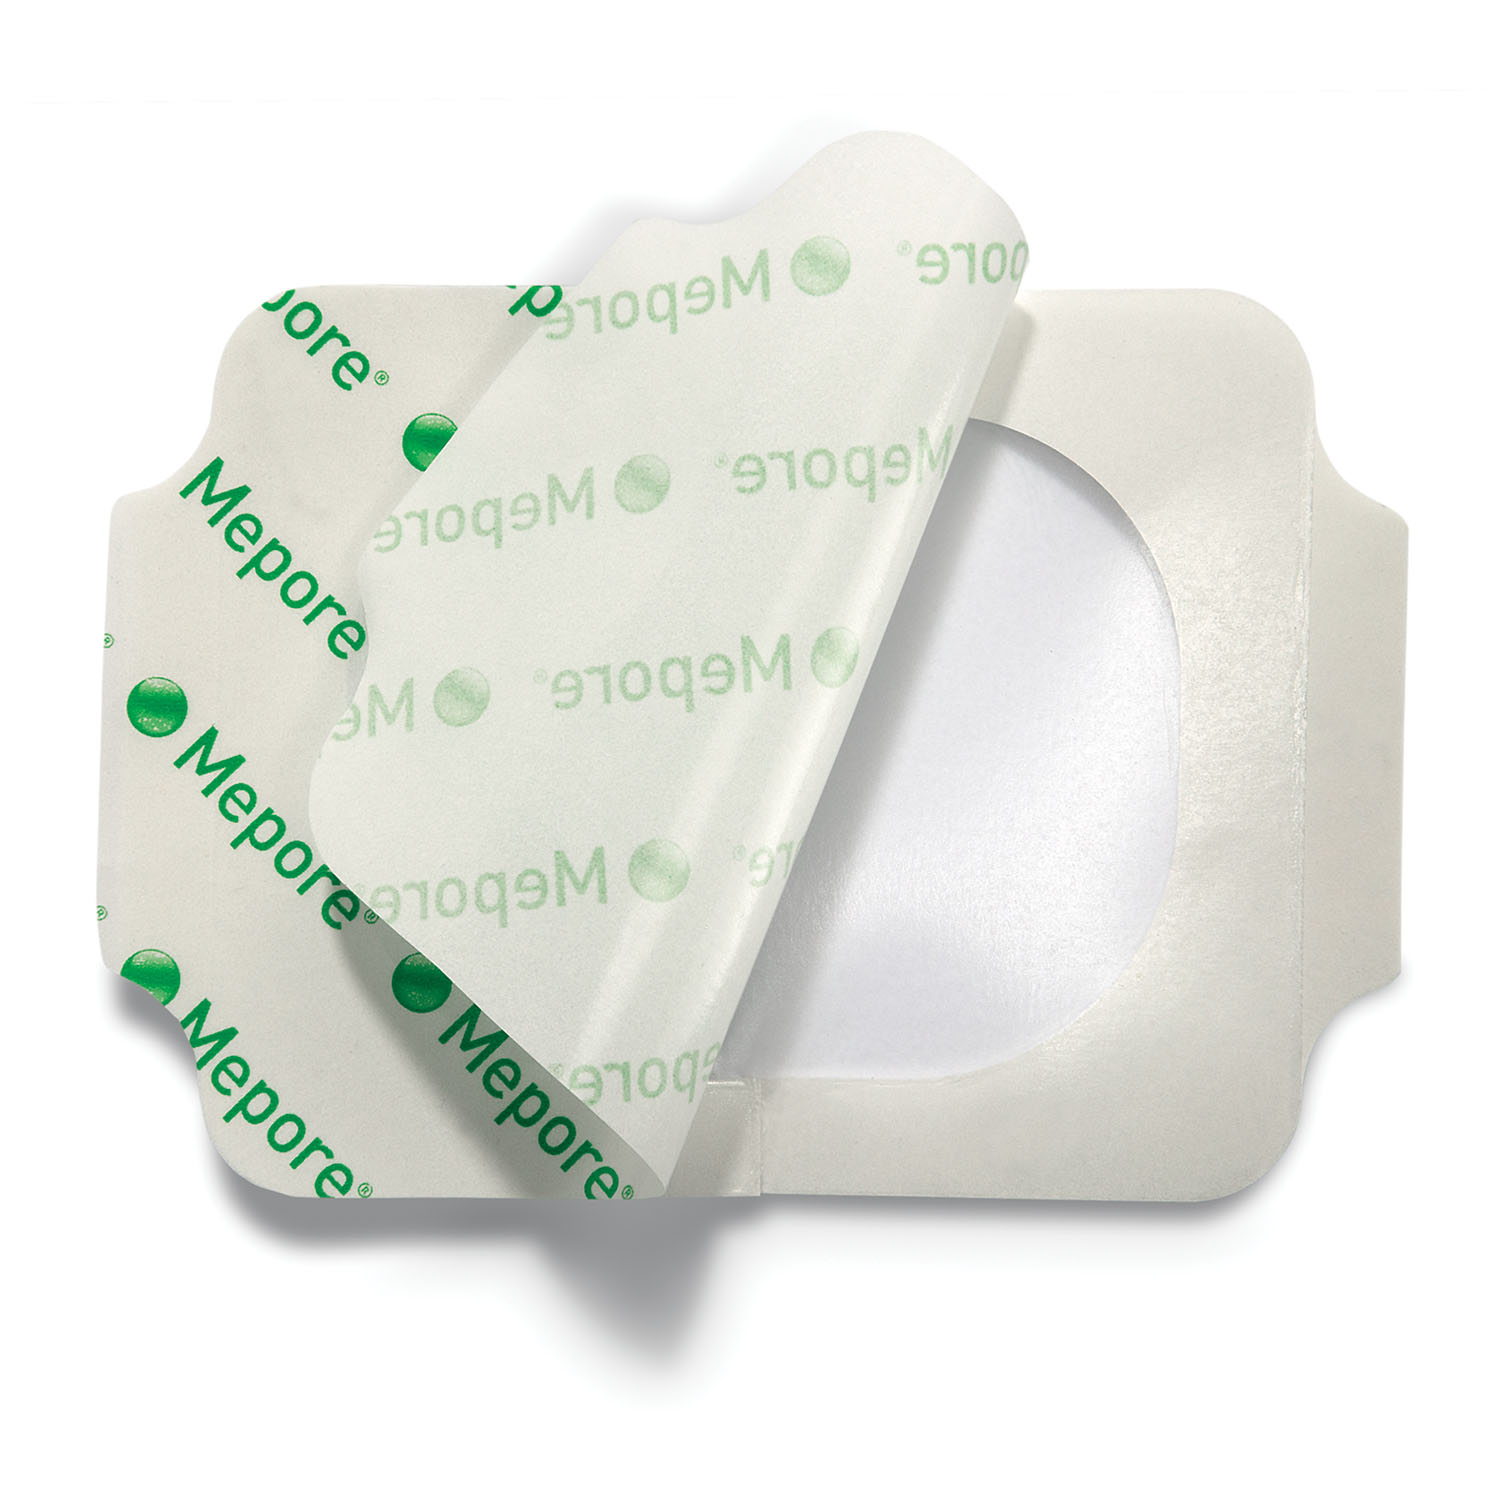 MOLNLYCKE WOUND MANAGEMENT - MEPORE FILM : 271500 BX $99.38 Stocked